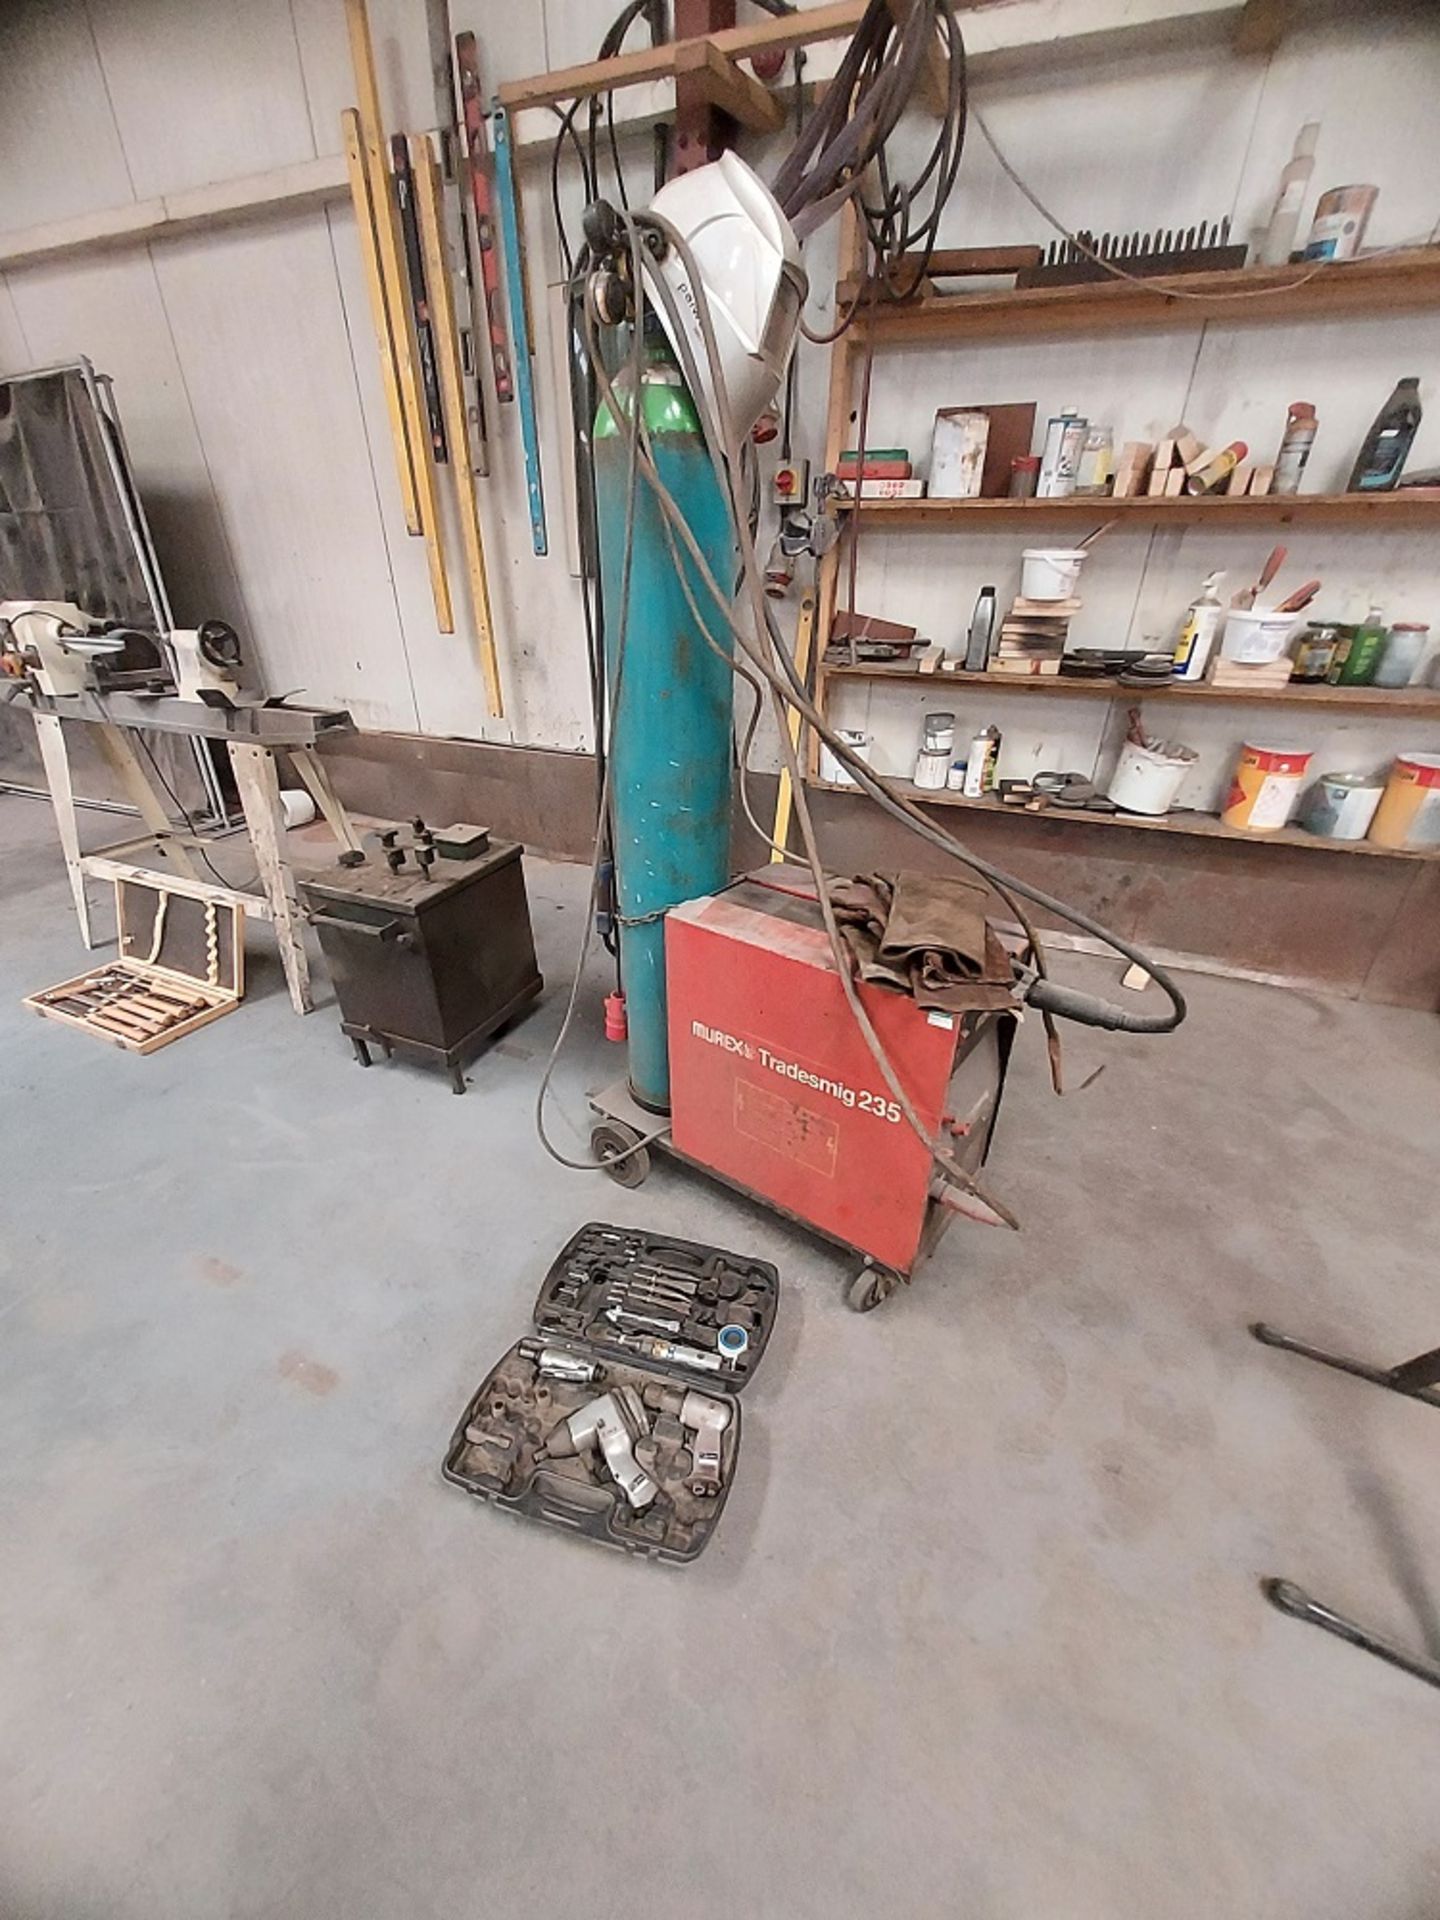 Assorted Arc, Gas and Aluminium Mig Welding Equipment Including Some Tools (Used) - Image 3 of 3